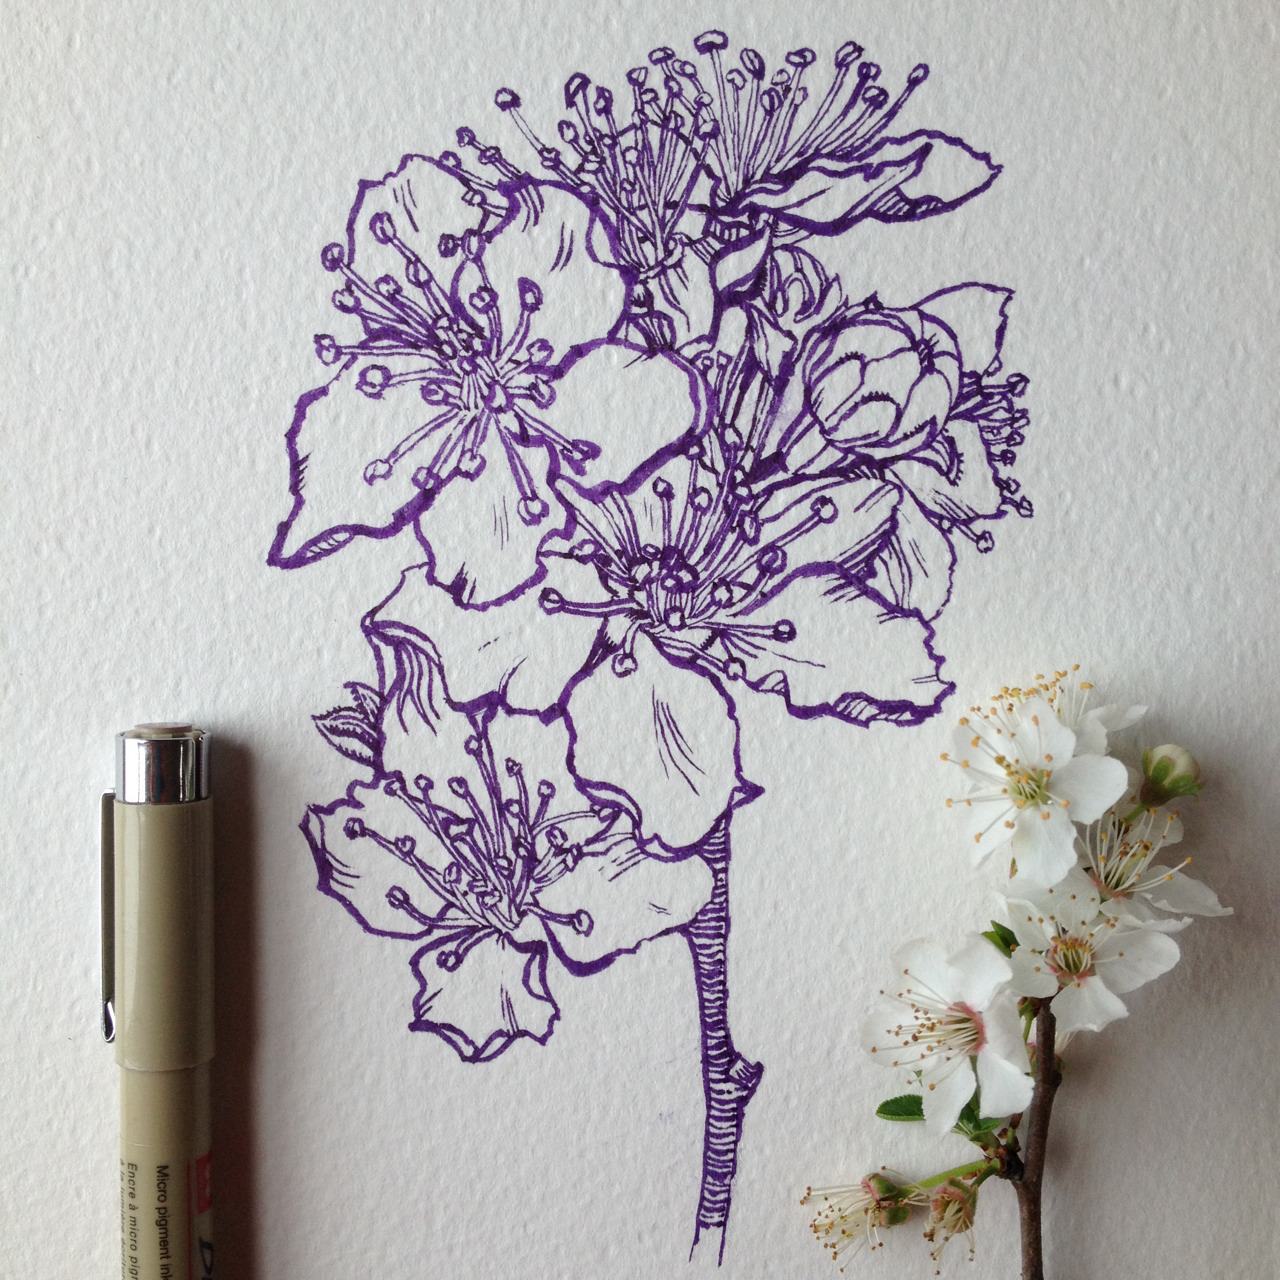 21+ Flower Drawings, Art Ideas, Sketches Design Trends